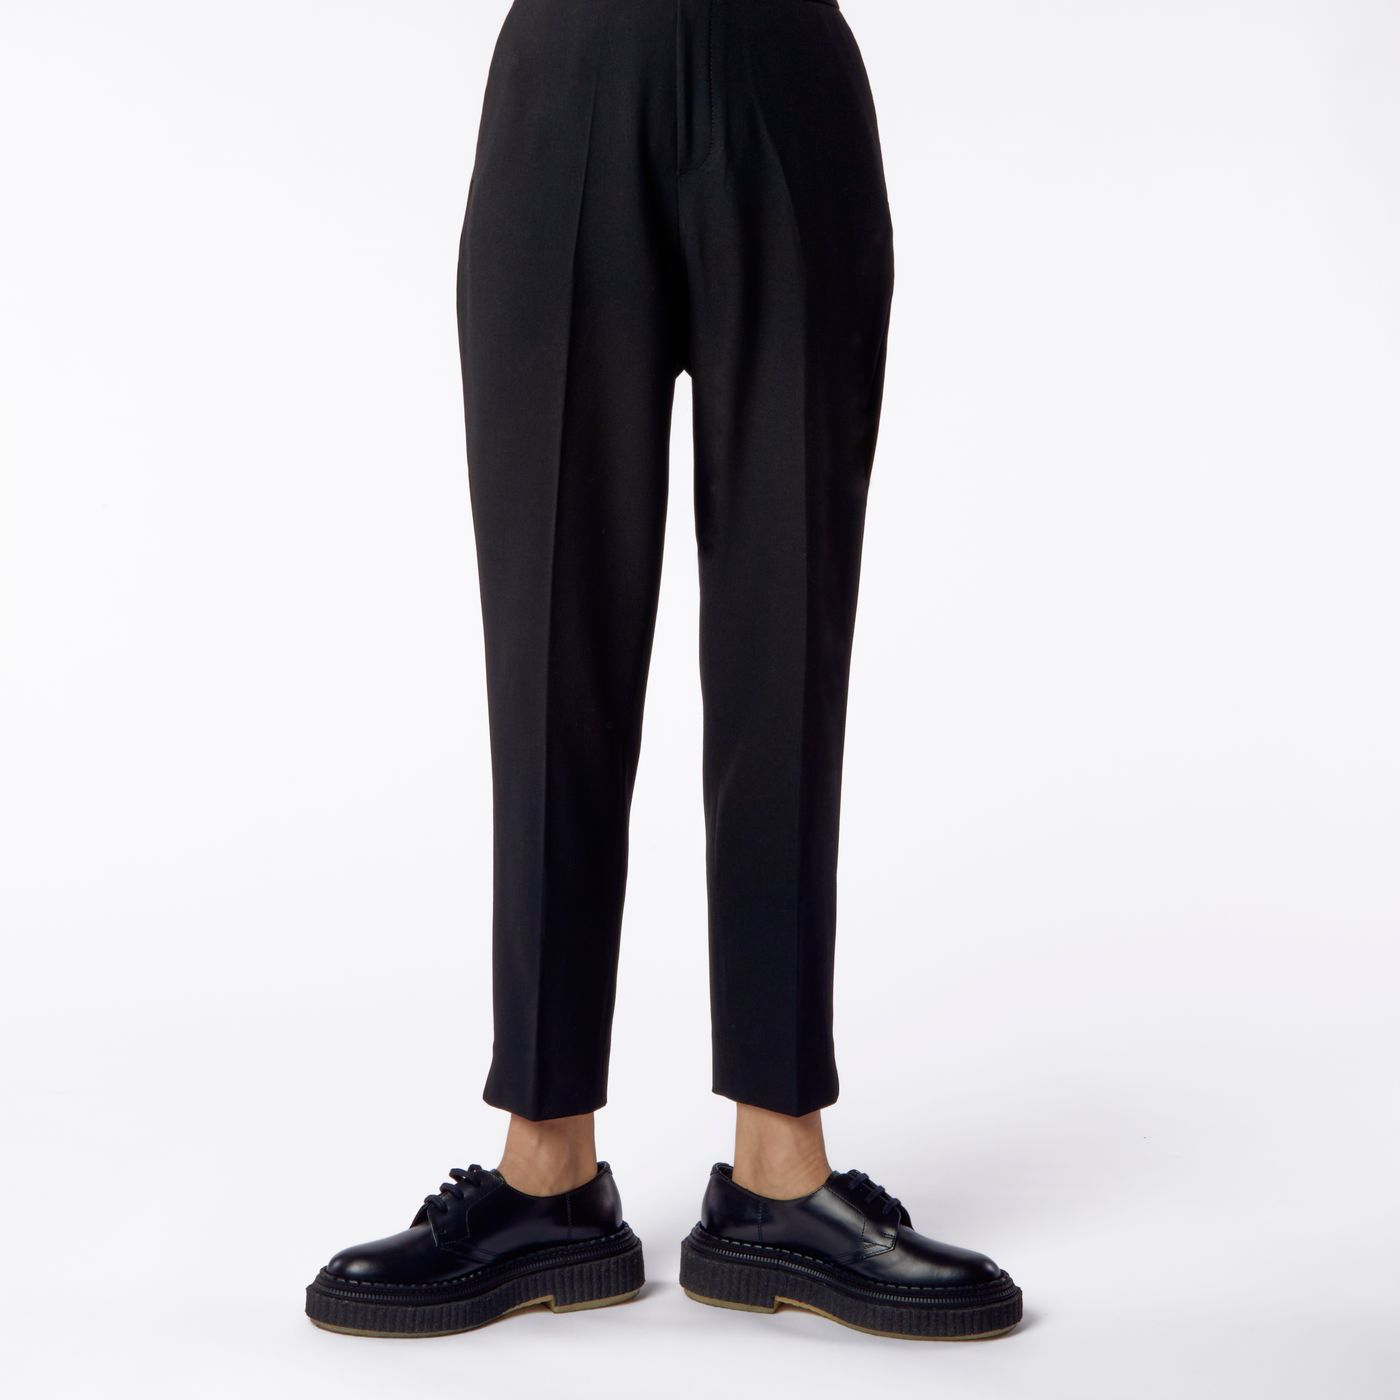 Ladies pants Manufacturers, suppliers & traders - All types of Ladies pants-bdsngoinhaviet.com.vn